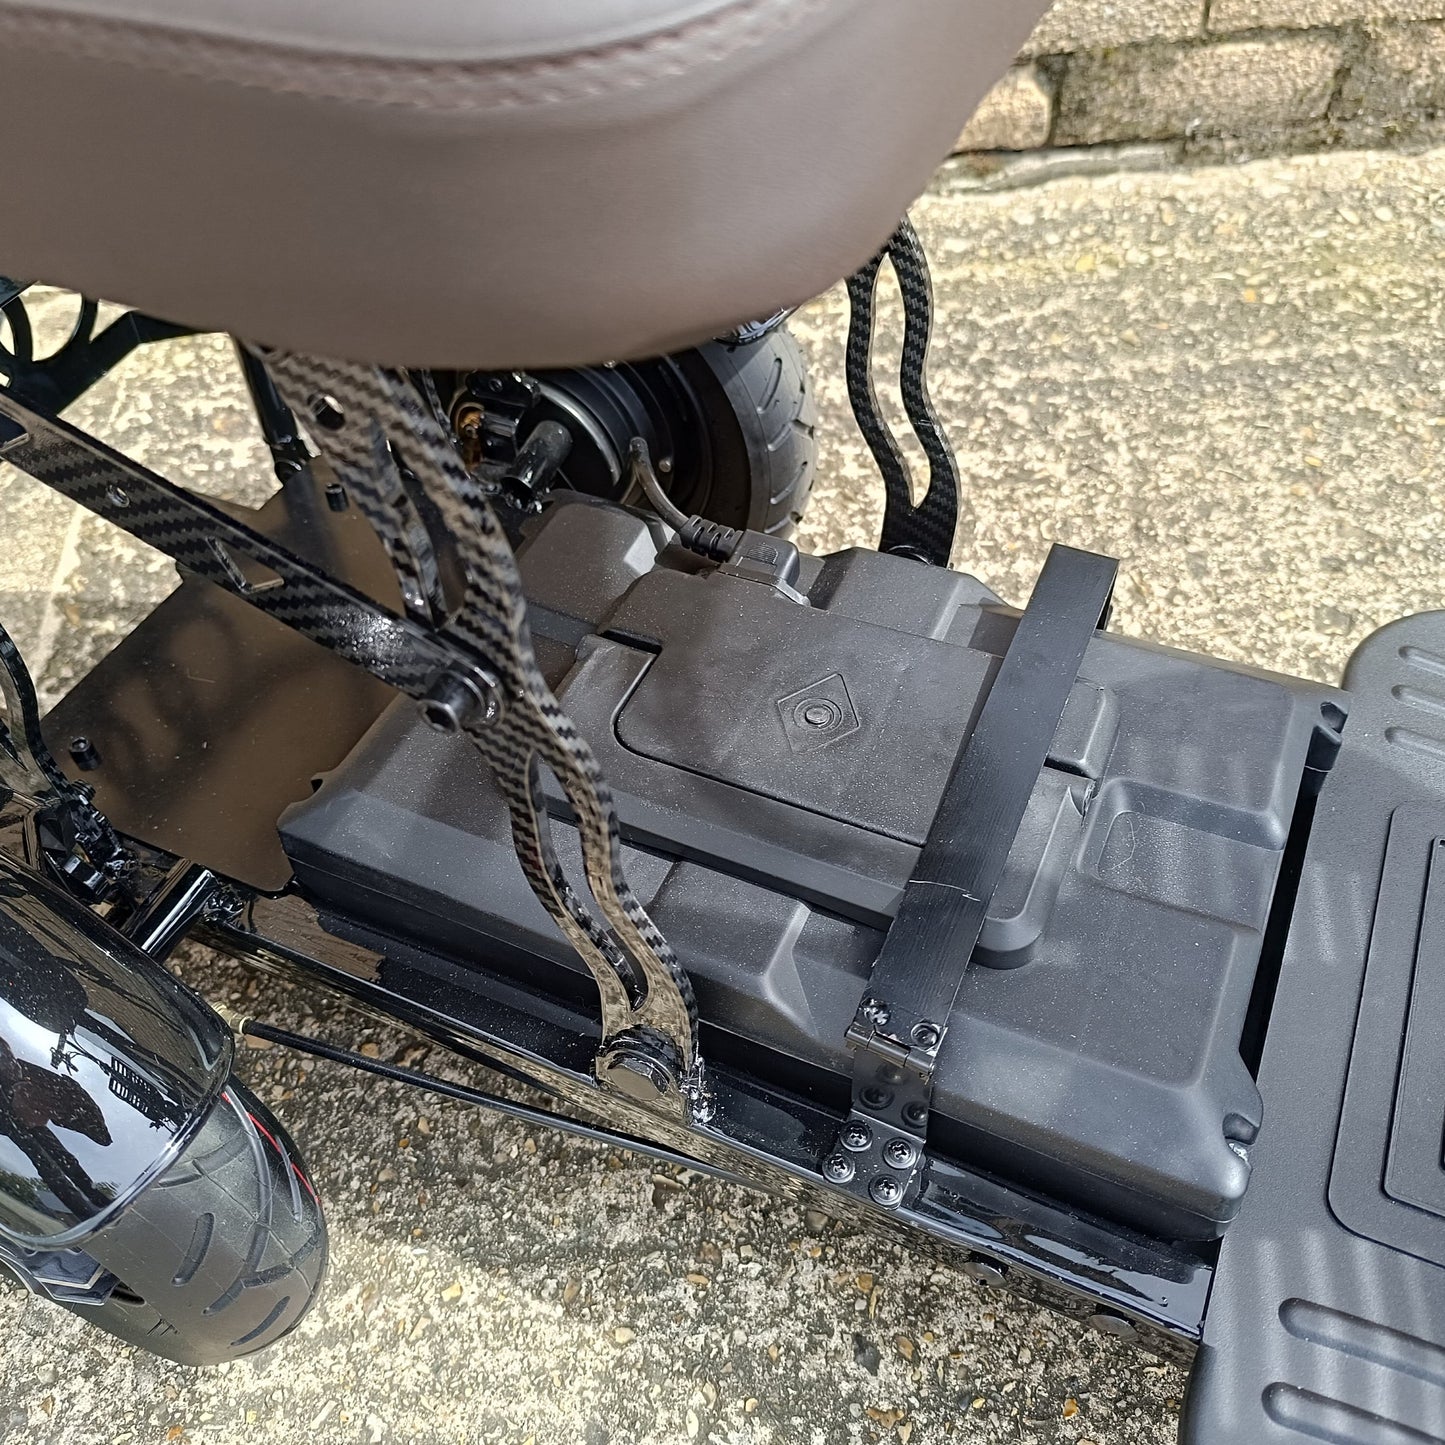 The Easy Folding 3 Wheel Mobility Scooter